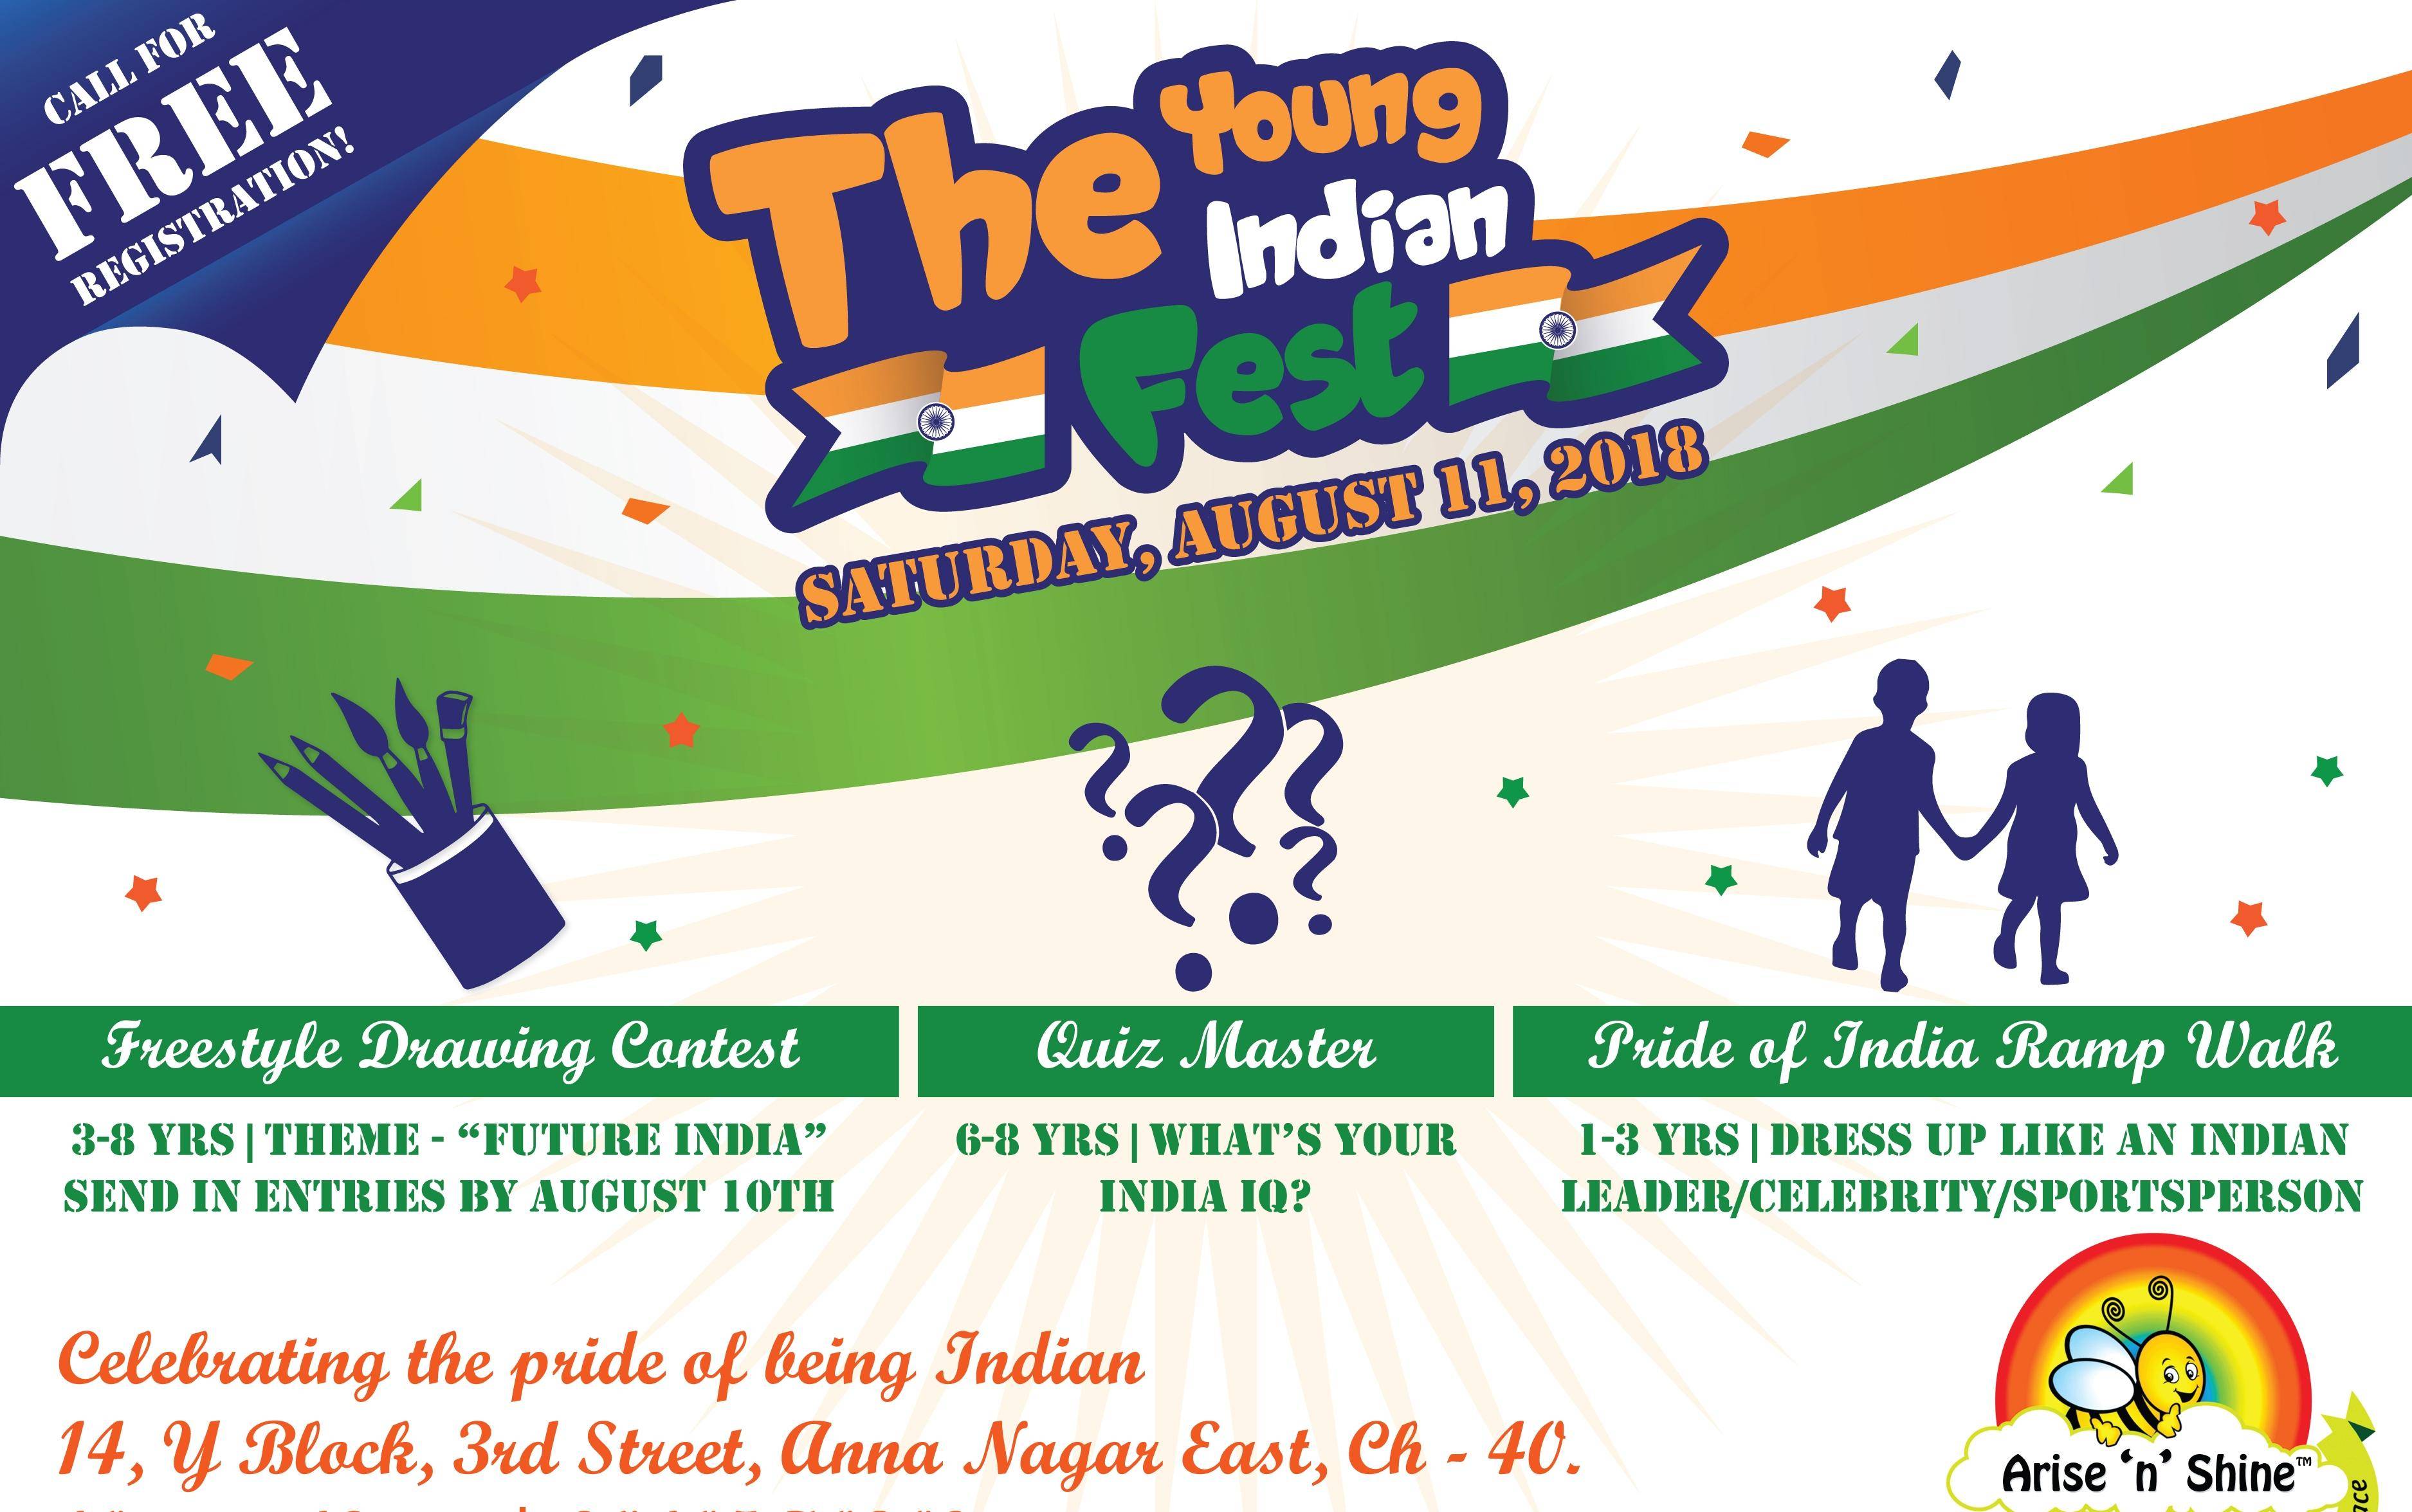 The Young Indian Fest